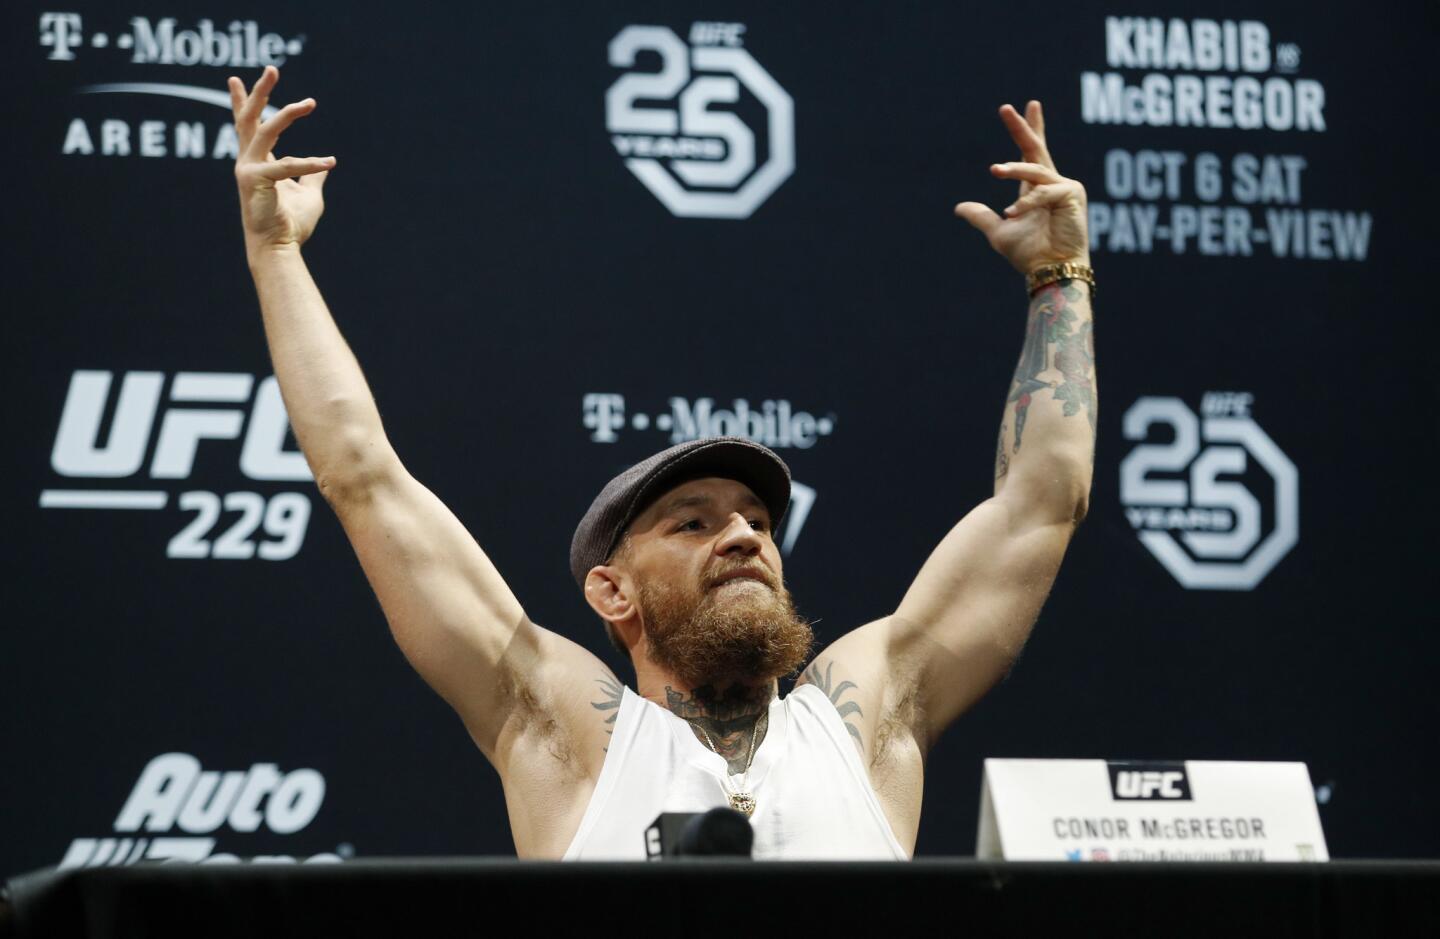 Conor McGregor raises his arms during a news conference for the UFC 229 mixed martial arts bouts Thursday, Oct. 4, 2018, in Las Vegas. McGregor is scheduled to fight Khabib Nurmagomedov on Saturday in Las Vegas. (AP Photo/John Locher)